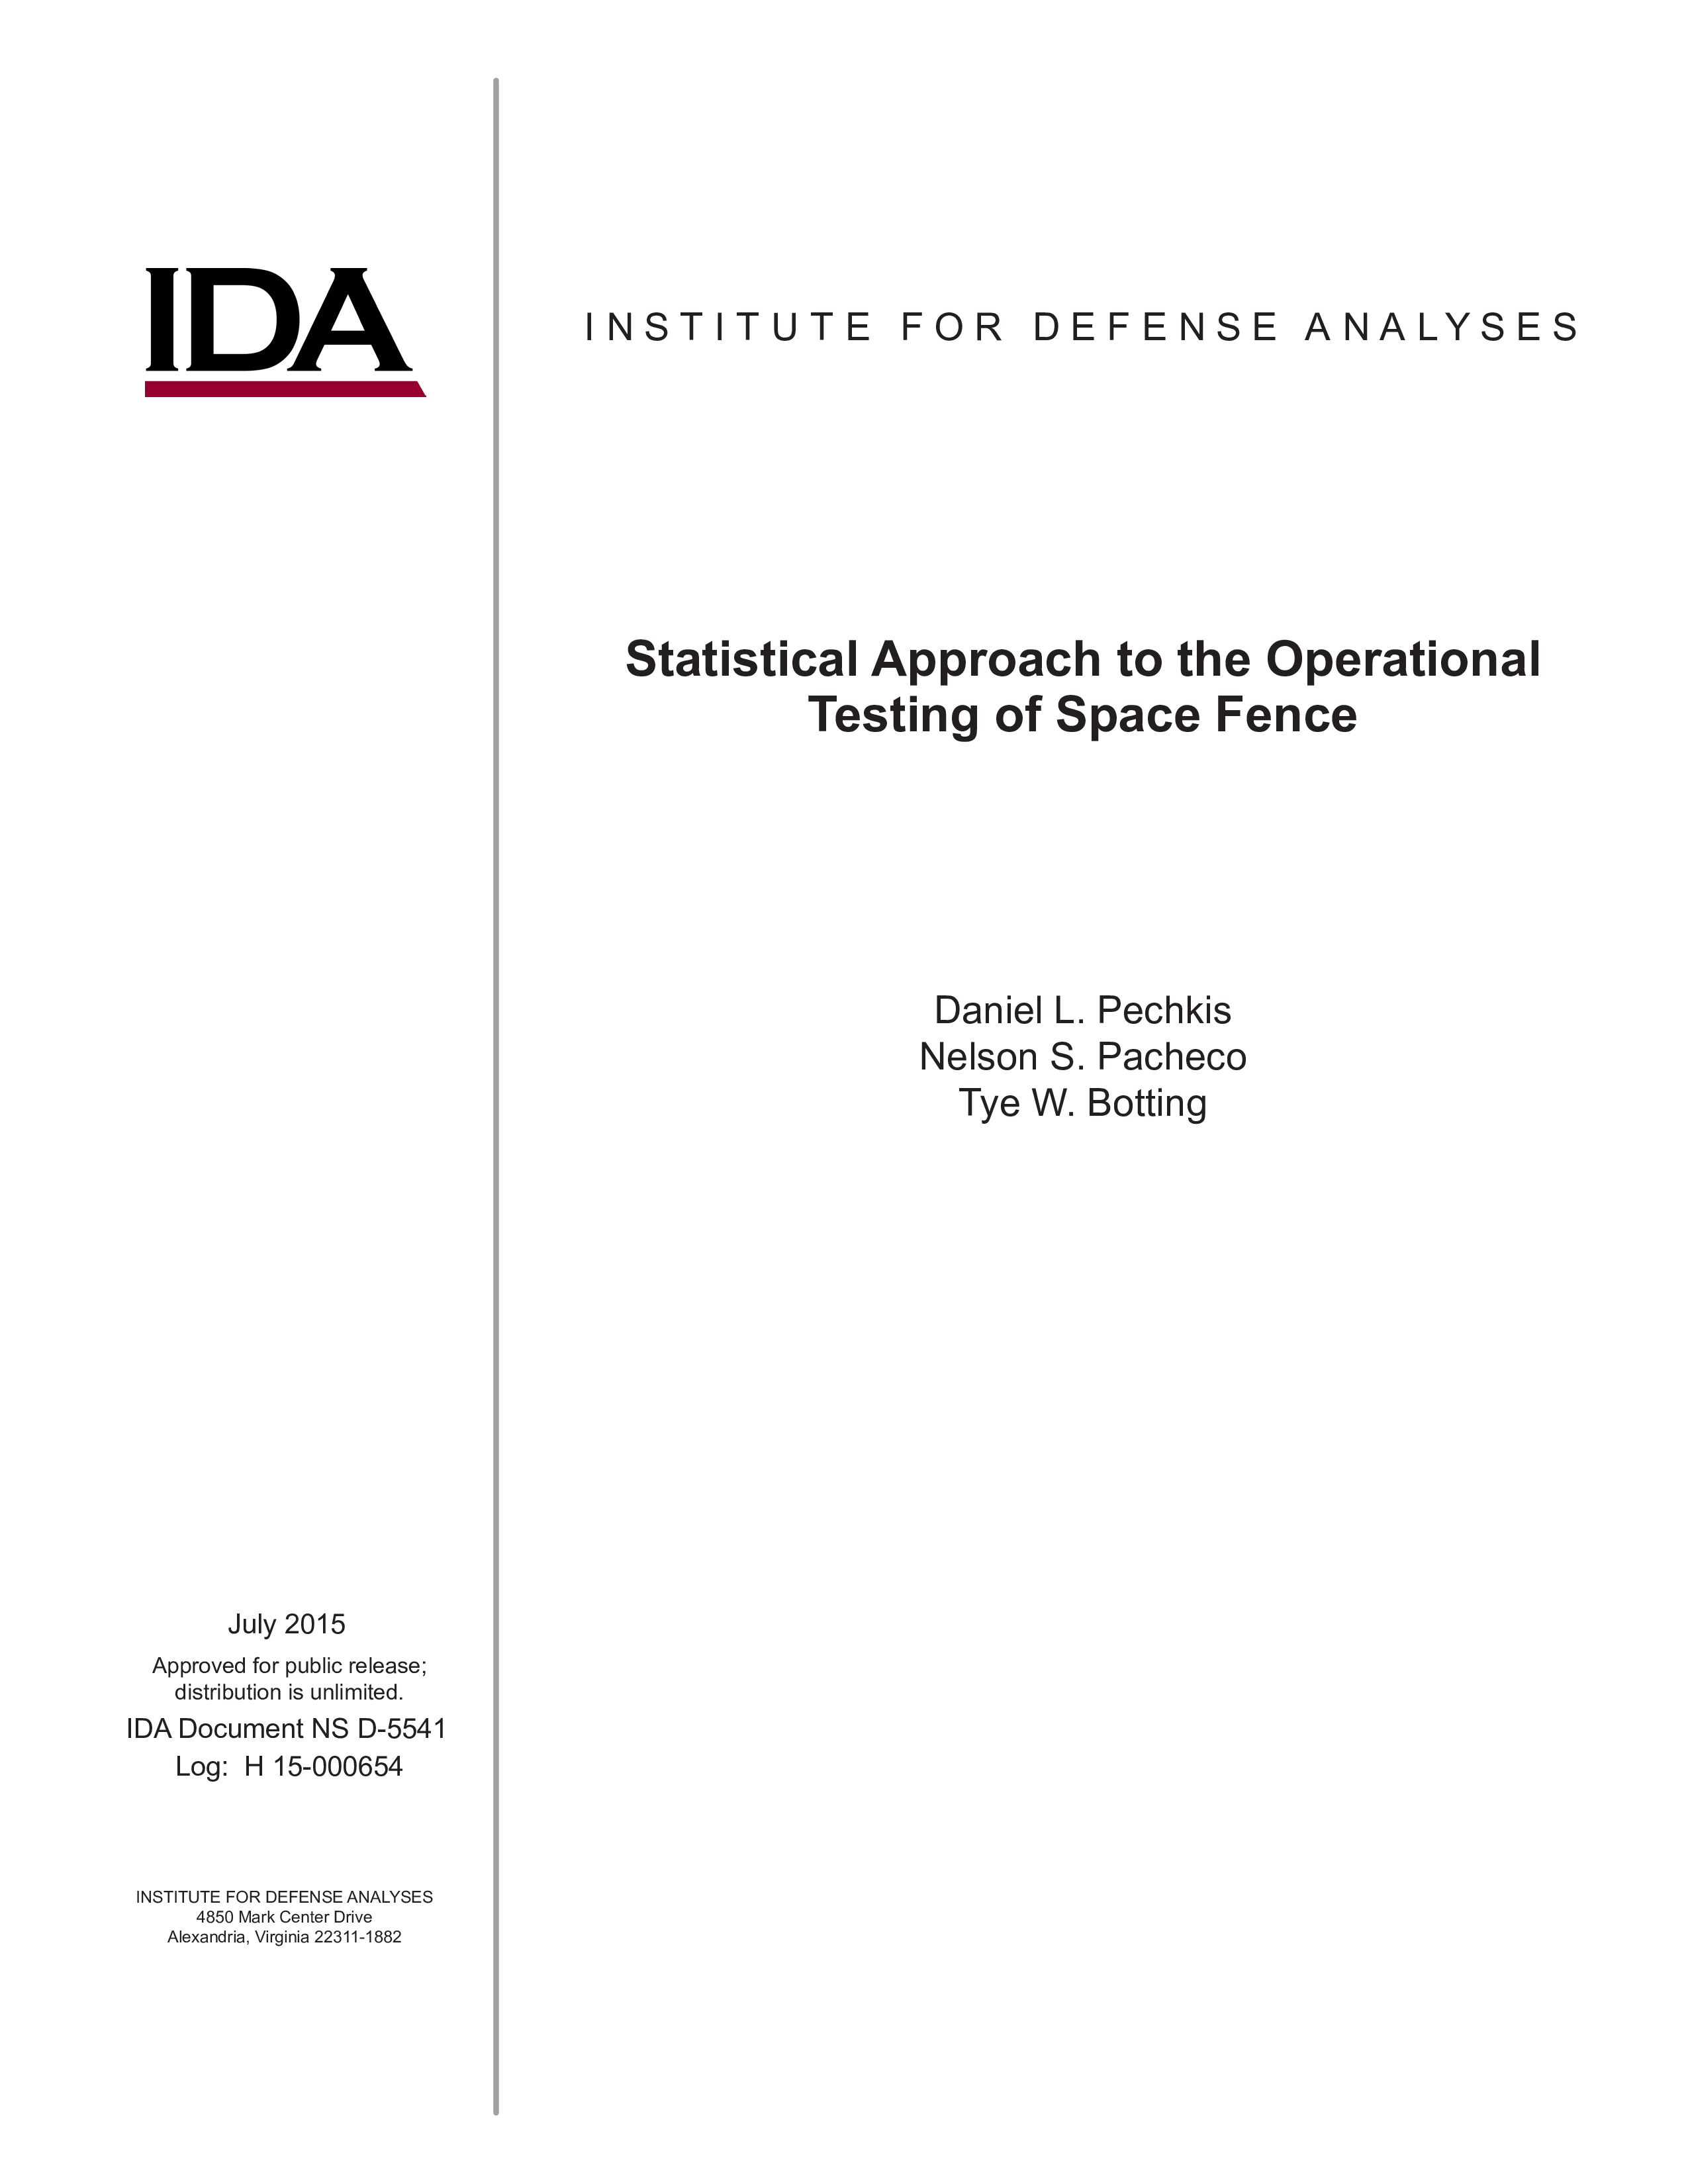 Statistical Approach to the Operational Testing of Space Fence cover image